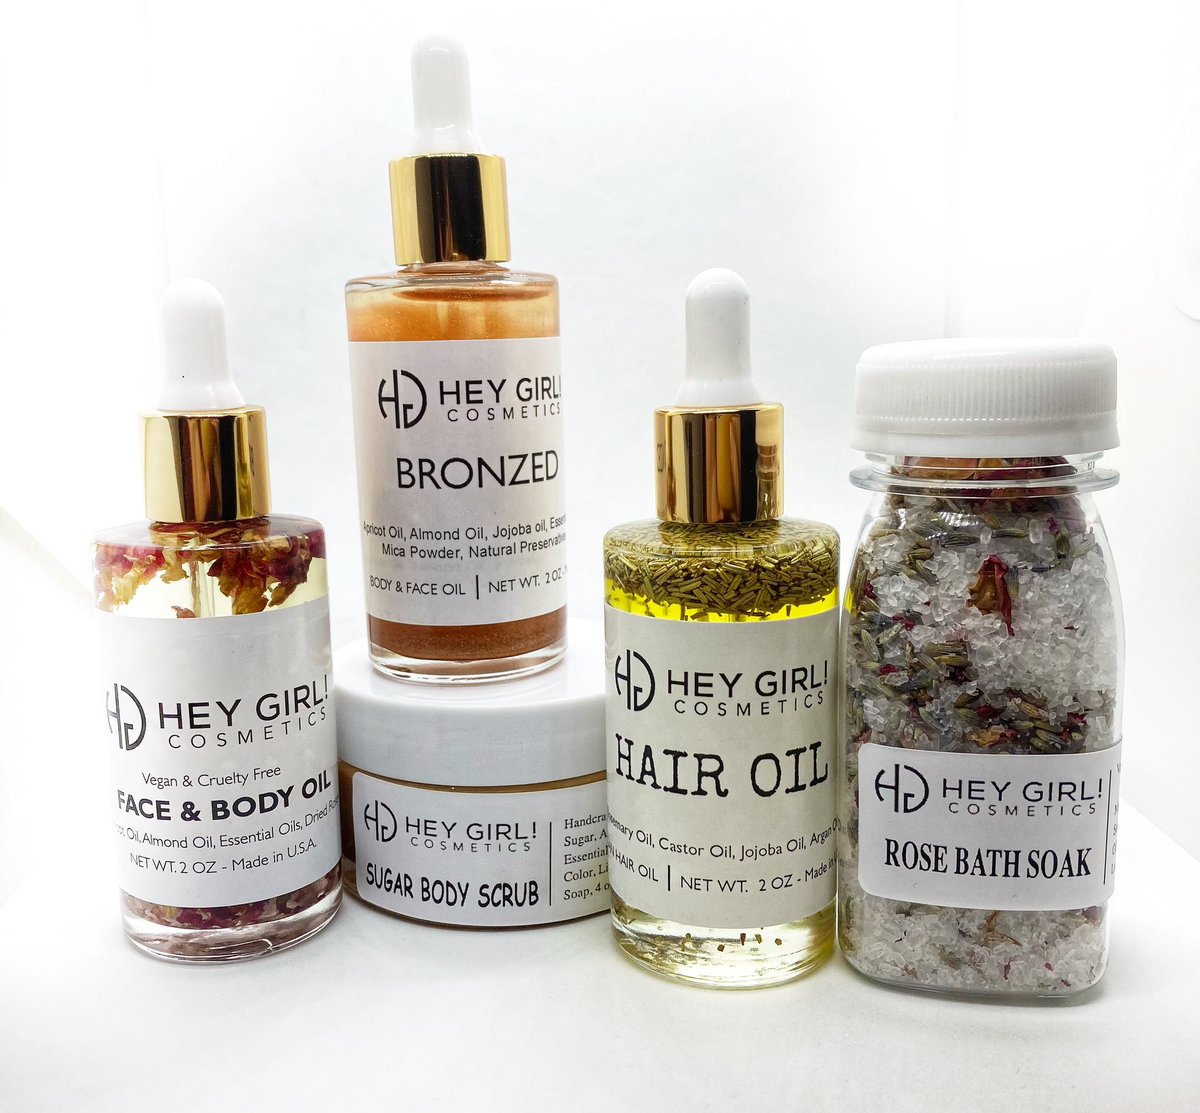 Ready to pamper ourselves with our Face & Hair Oils and Face & Body Scrubs/Baths. This Relaxation Set is here to stay :) #weekendvibes #friyay #naturalcosmetics #holisticbeauty #thisisheygirl #heygirlcosmetics #handmade #vegancosmetics